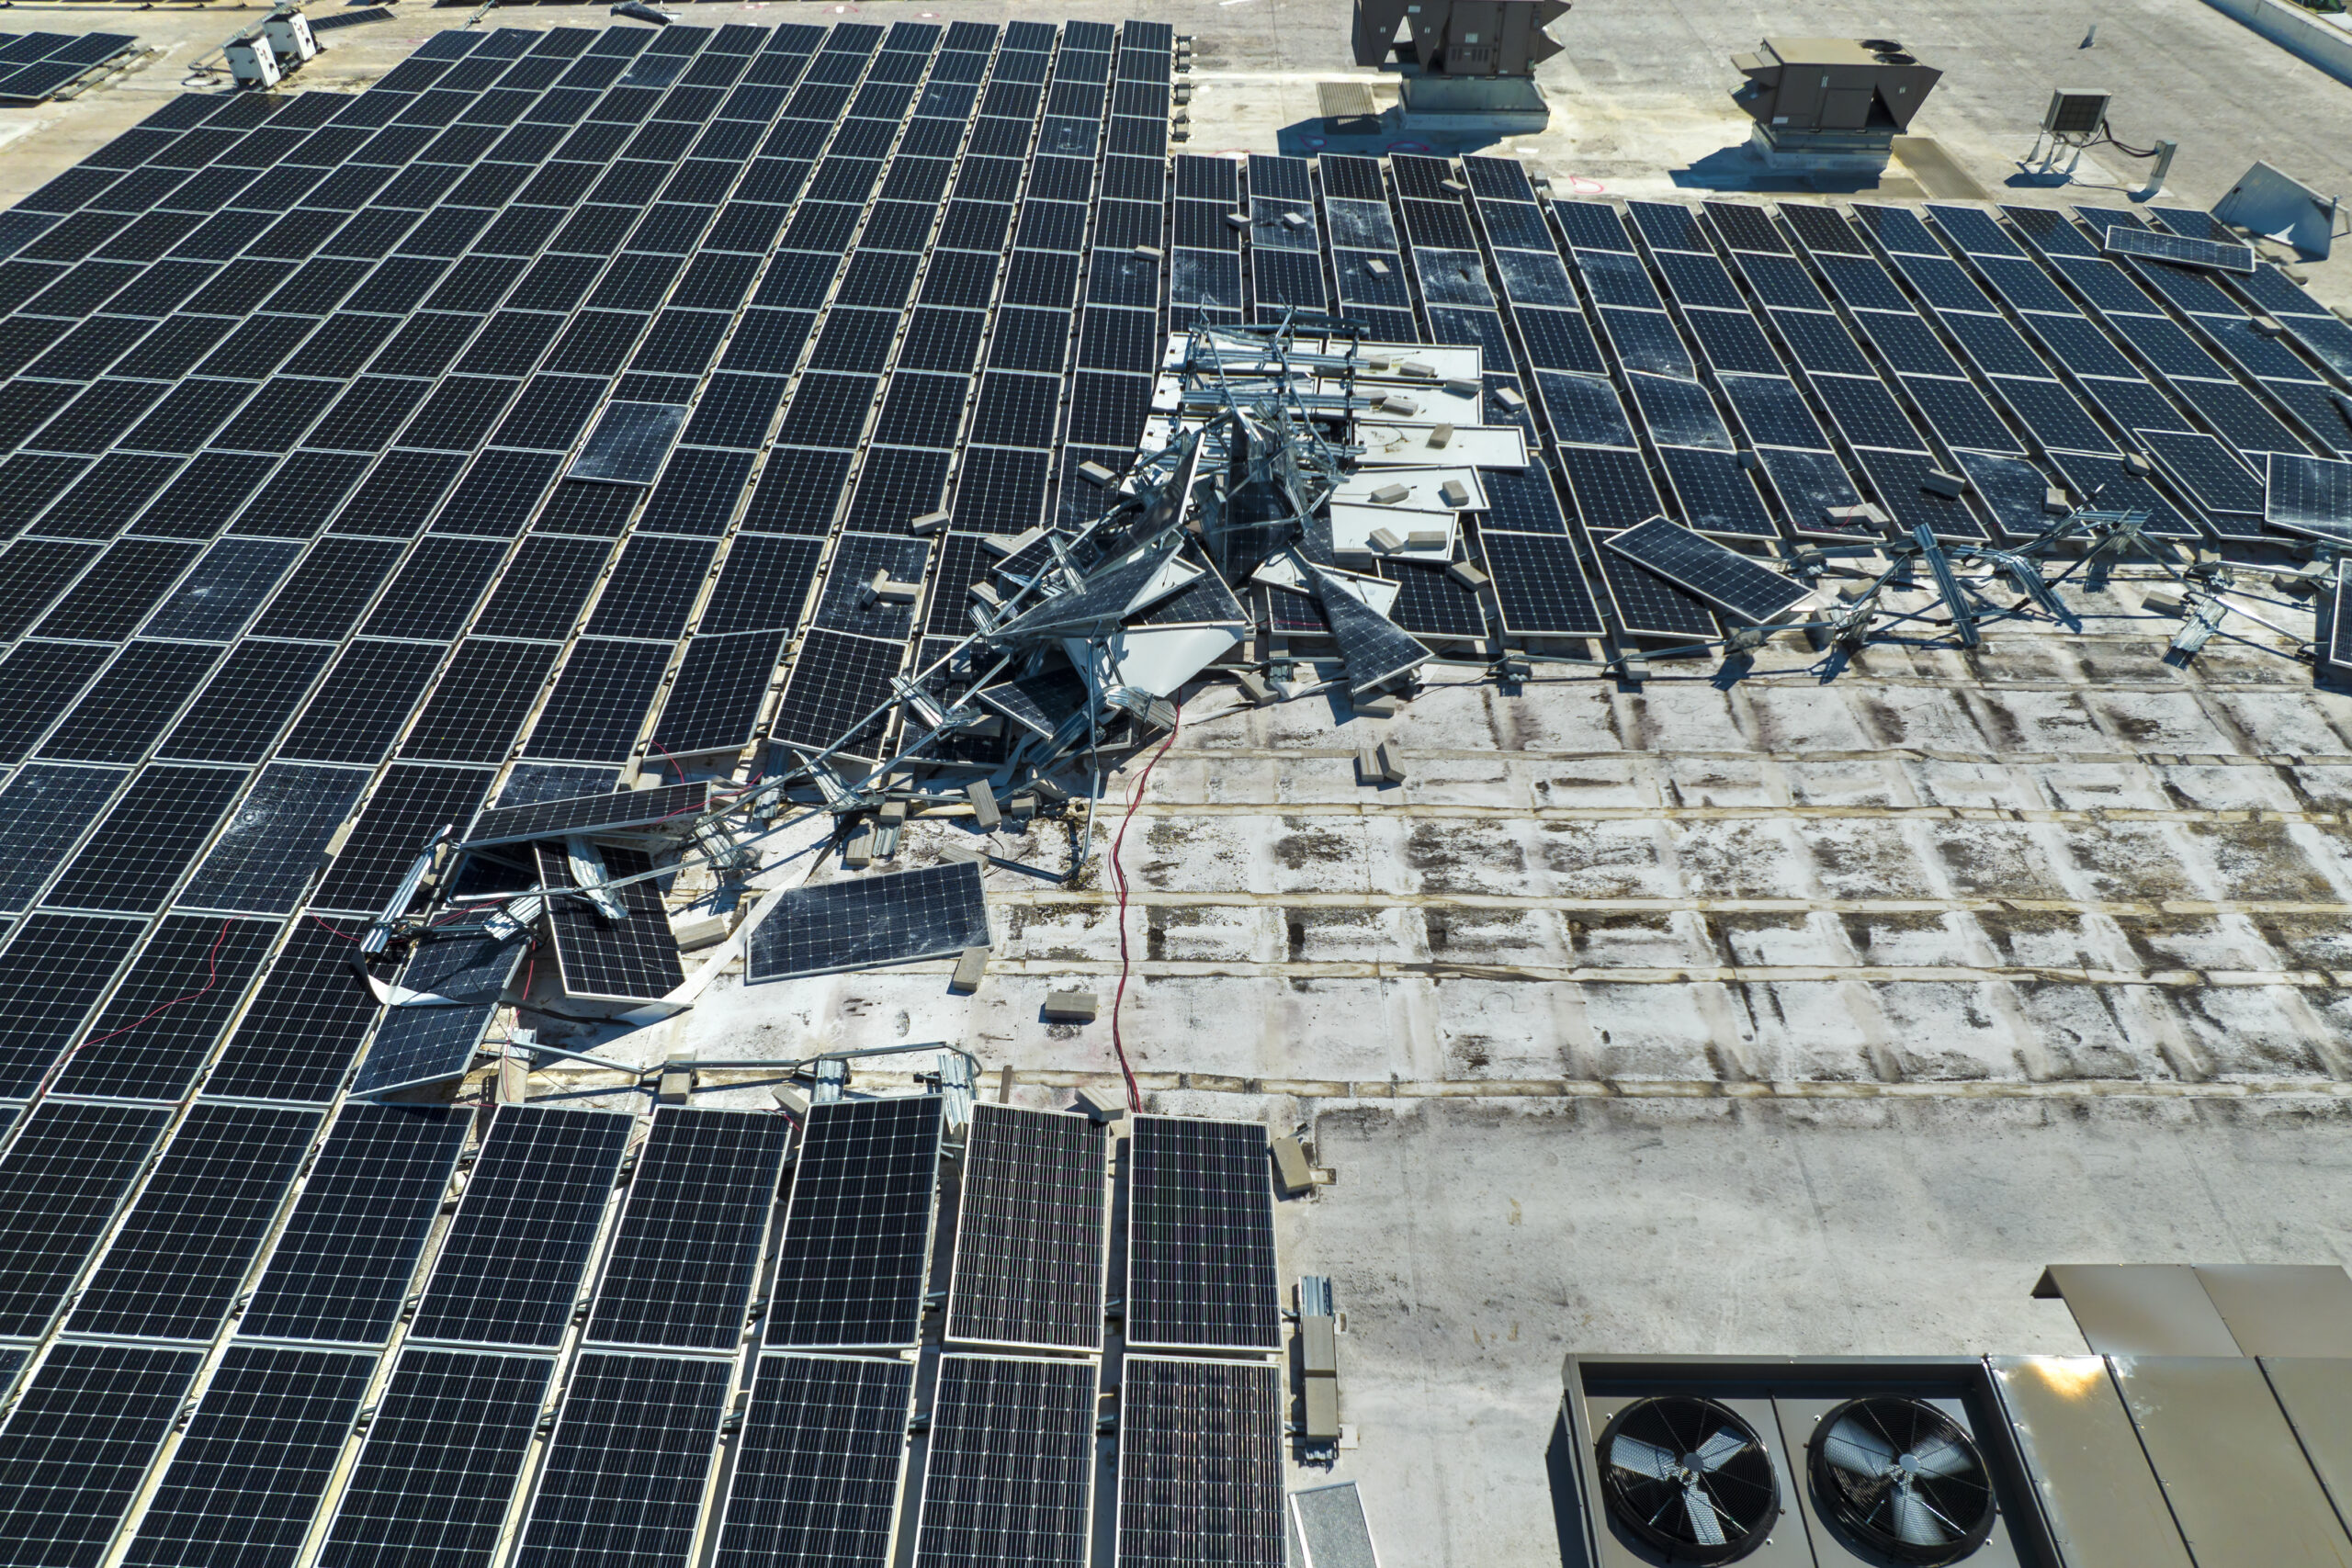 Destroyed by hurricane winds broken down photovoltaic solar panels mounted on industrial building roof for producing green ecological electricity. Consequences of natural disaster in Florida.